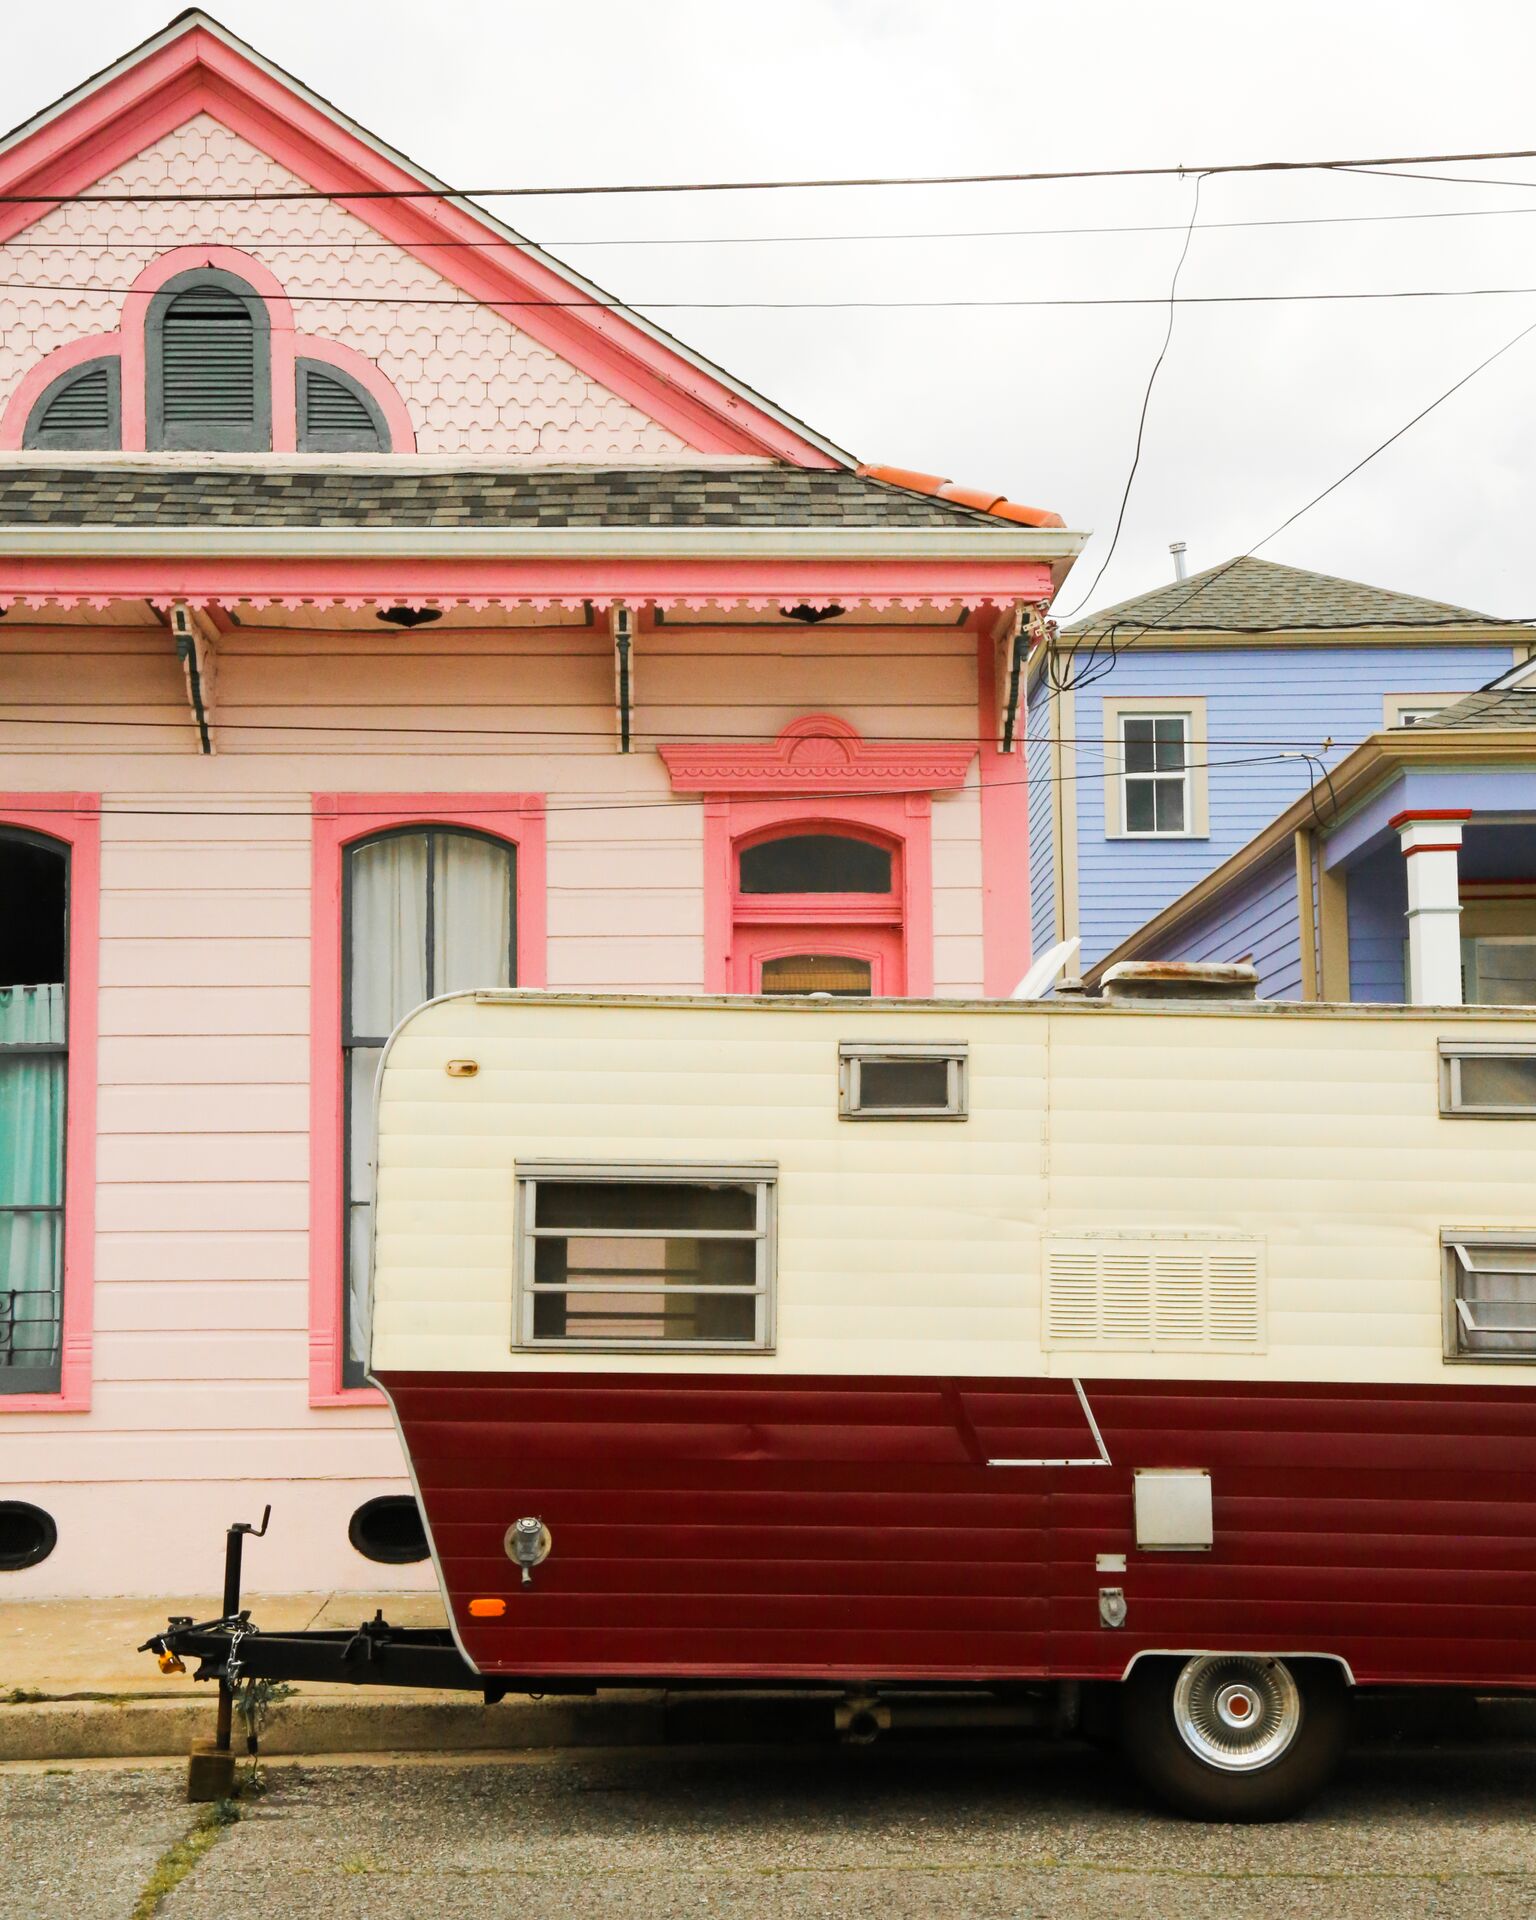 10 Things You Should Know Before Buying A Vintage Camper